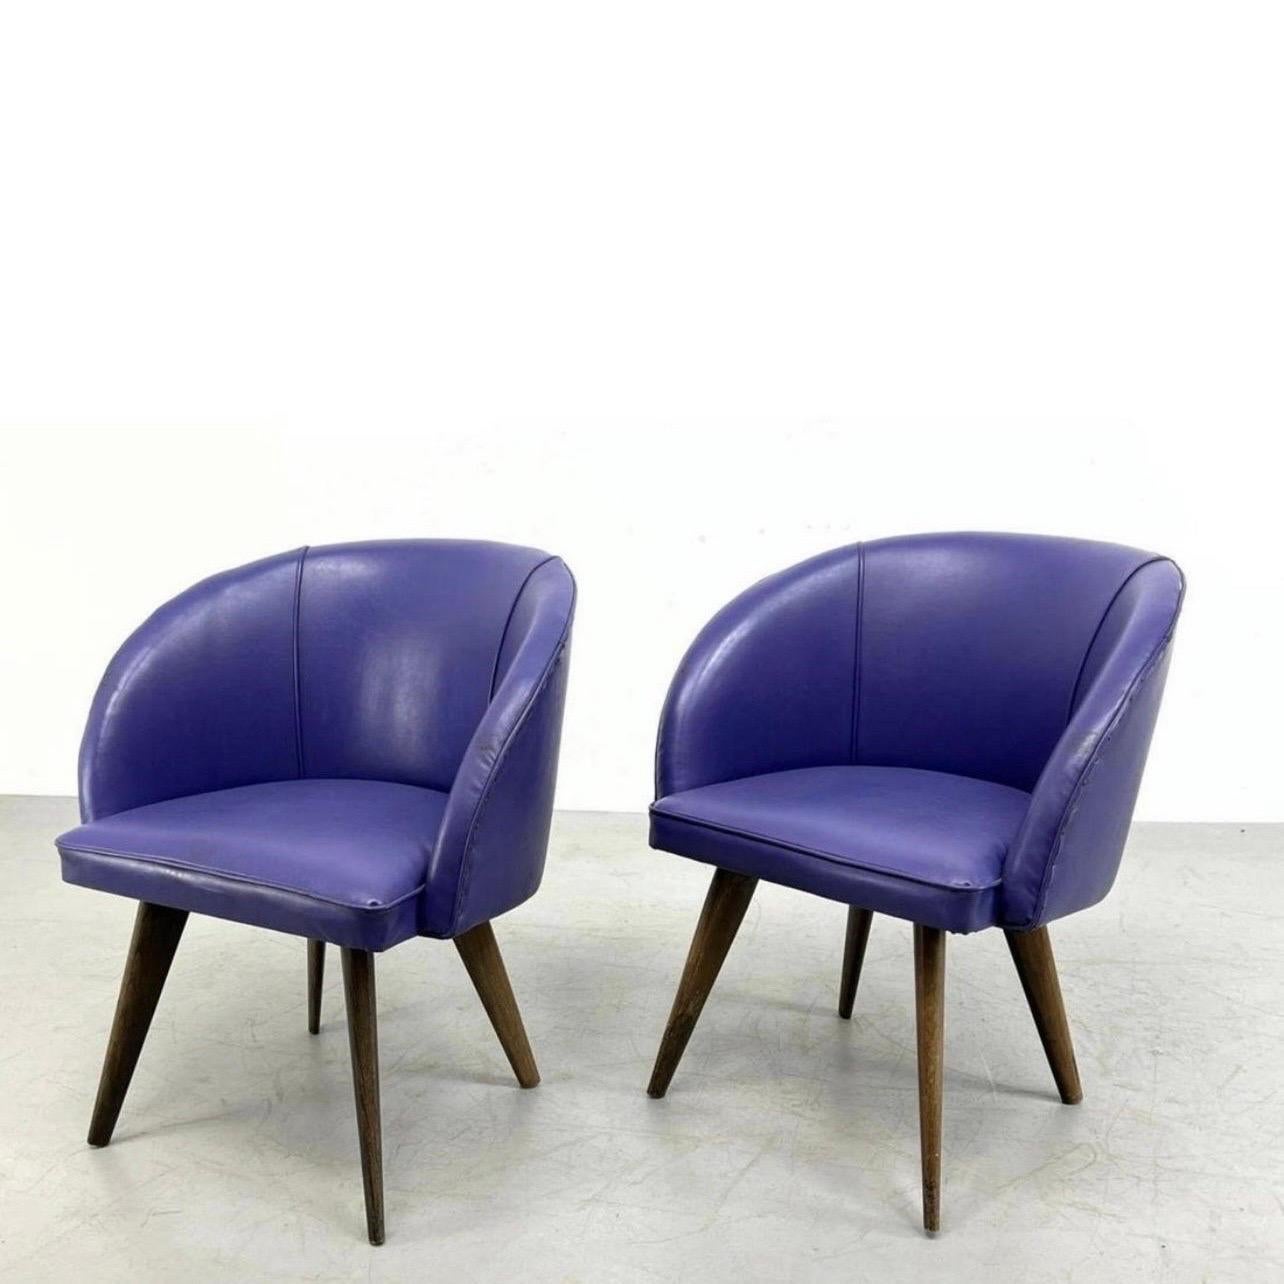 Danish Modern Purple Upholstered Barrel Tub Chairs - a Pair In Good Condition For Sale In Charleston, SC